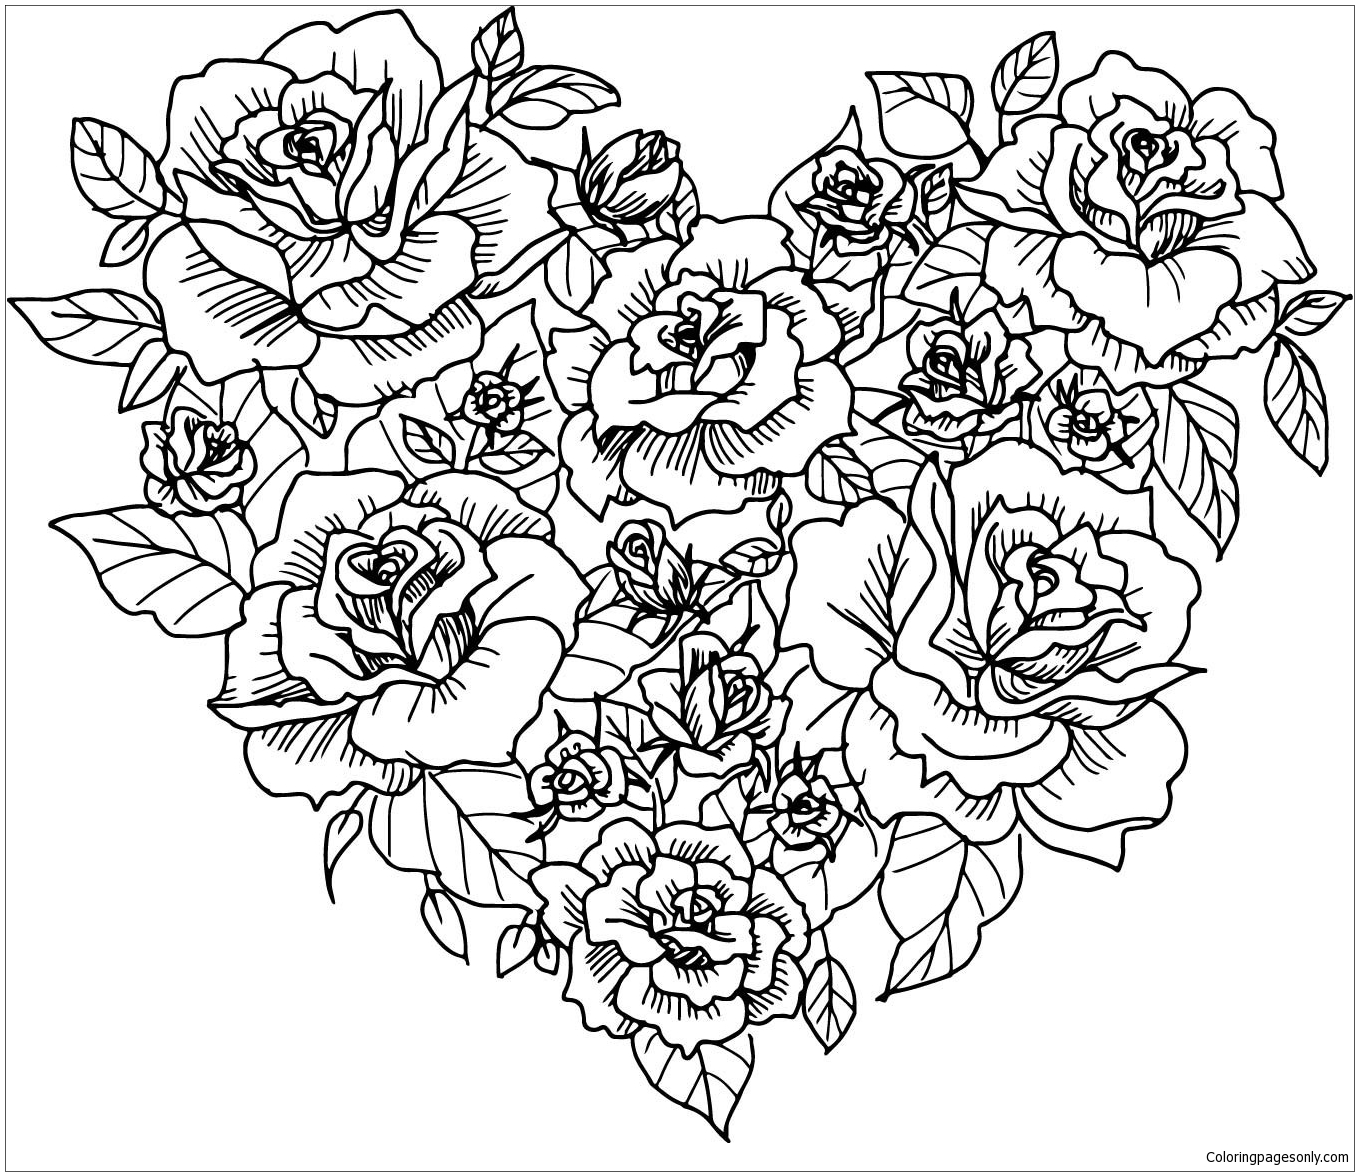 Heart With Flowers Coloring Page - Free Coloring Pages Online